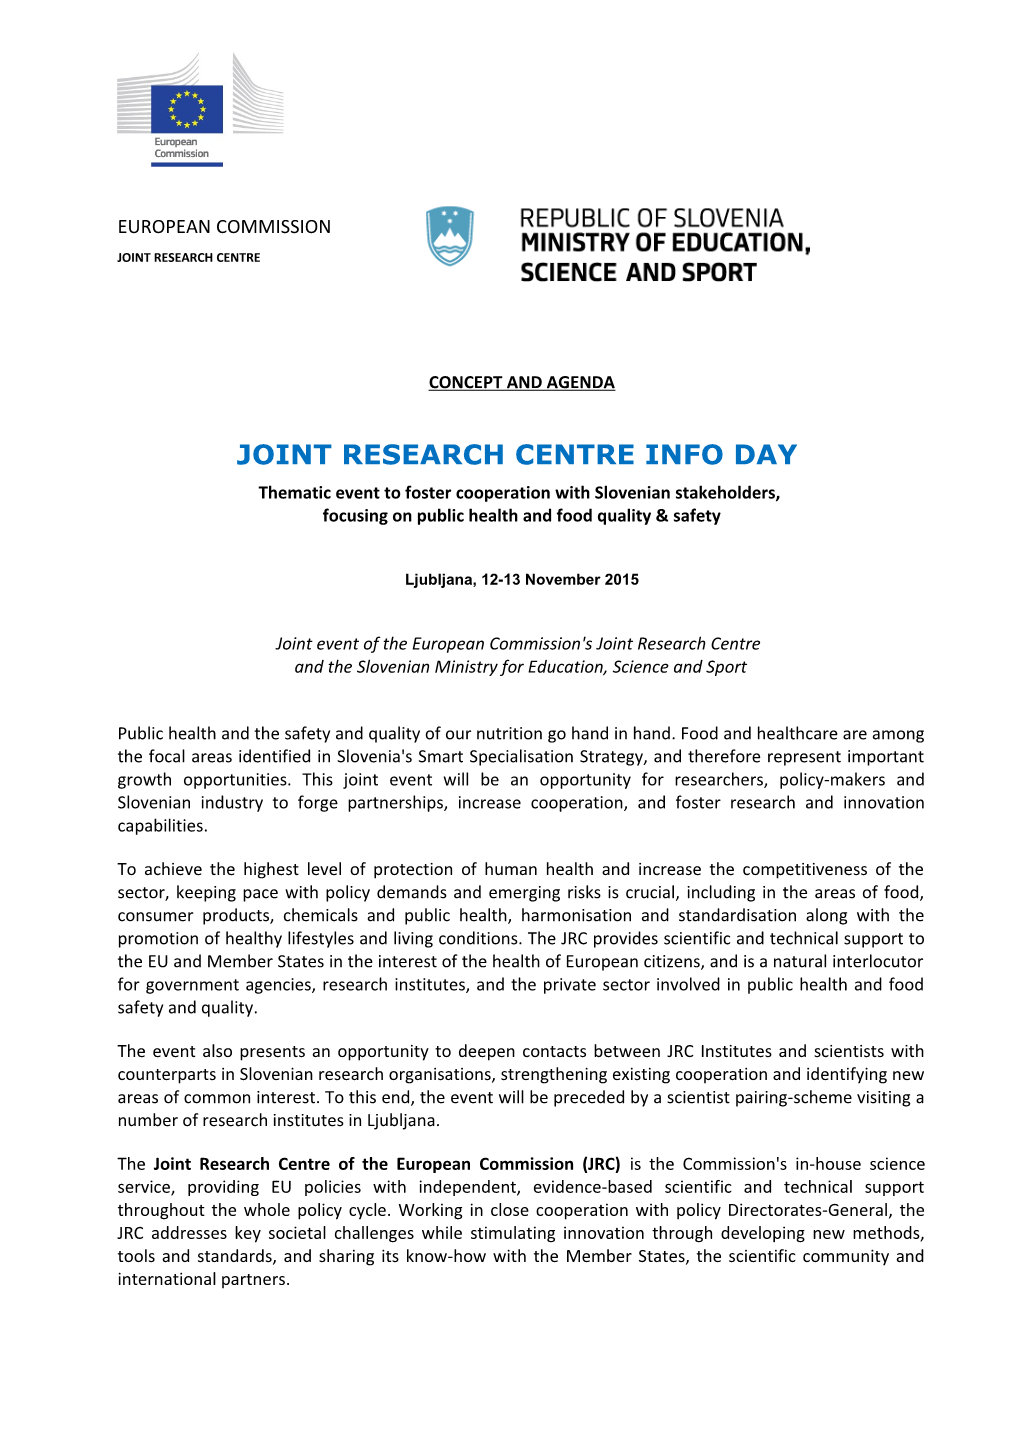 Joint Research Centre Info Day